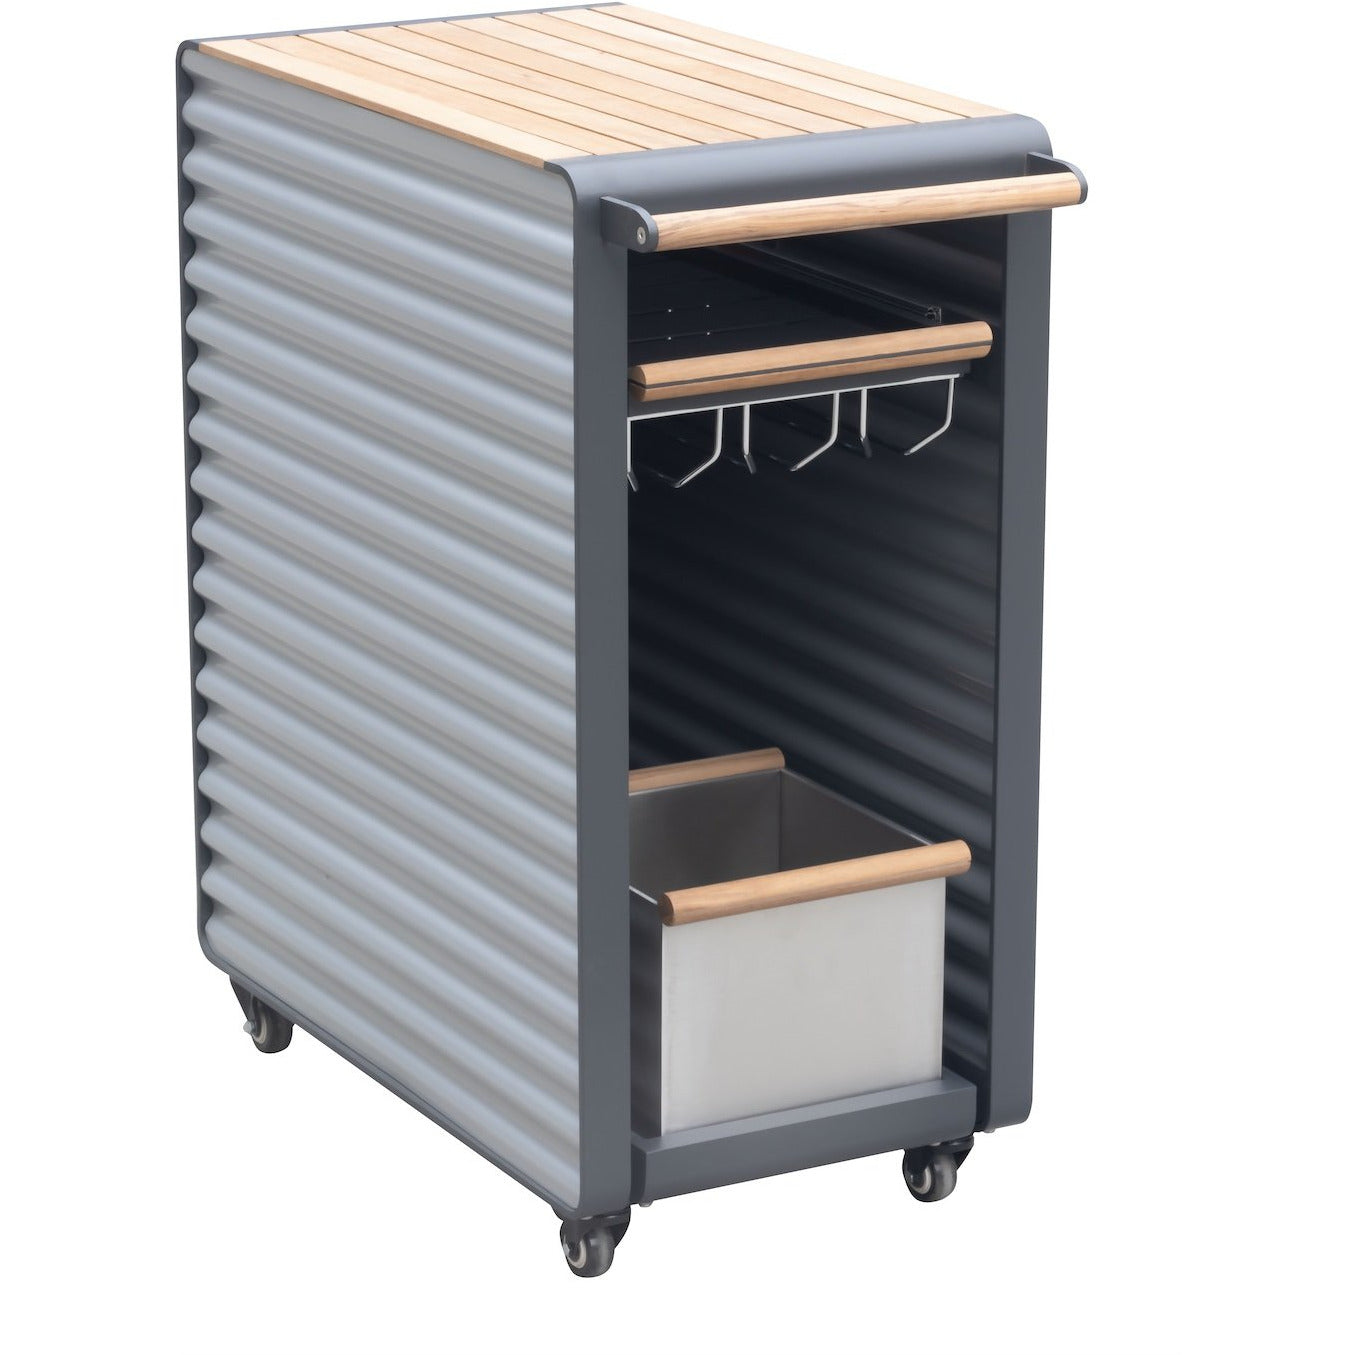 Airport Drinks Trolley - PadioLiving - Airport Drinks Trolley - Outdoor Drinks Trolley - Black - PadioLiving